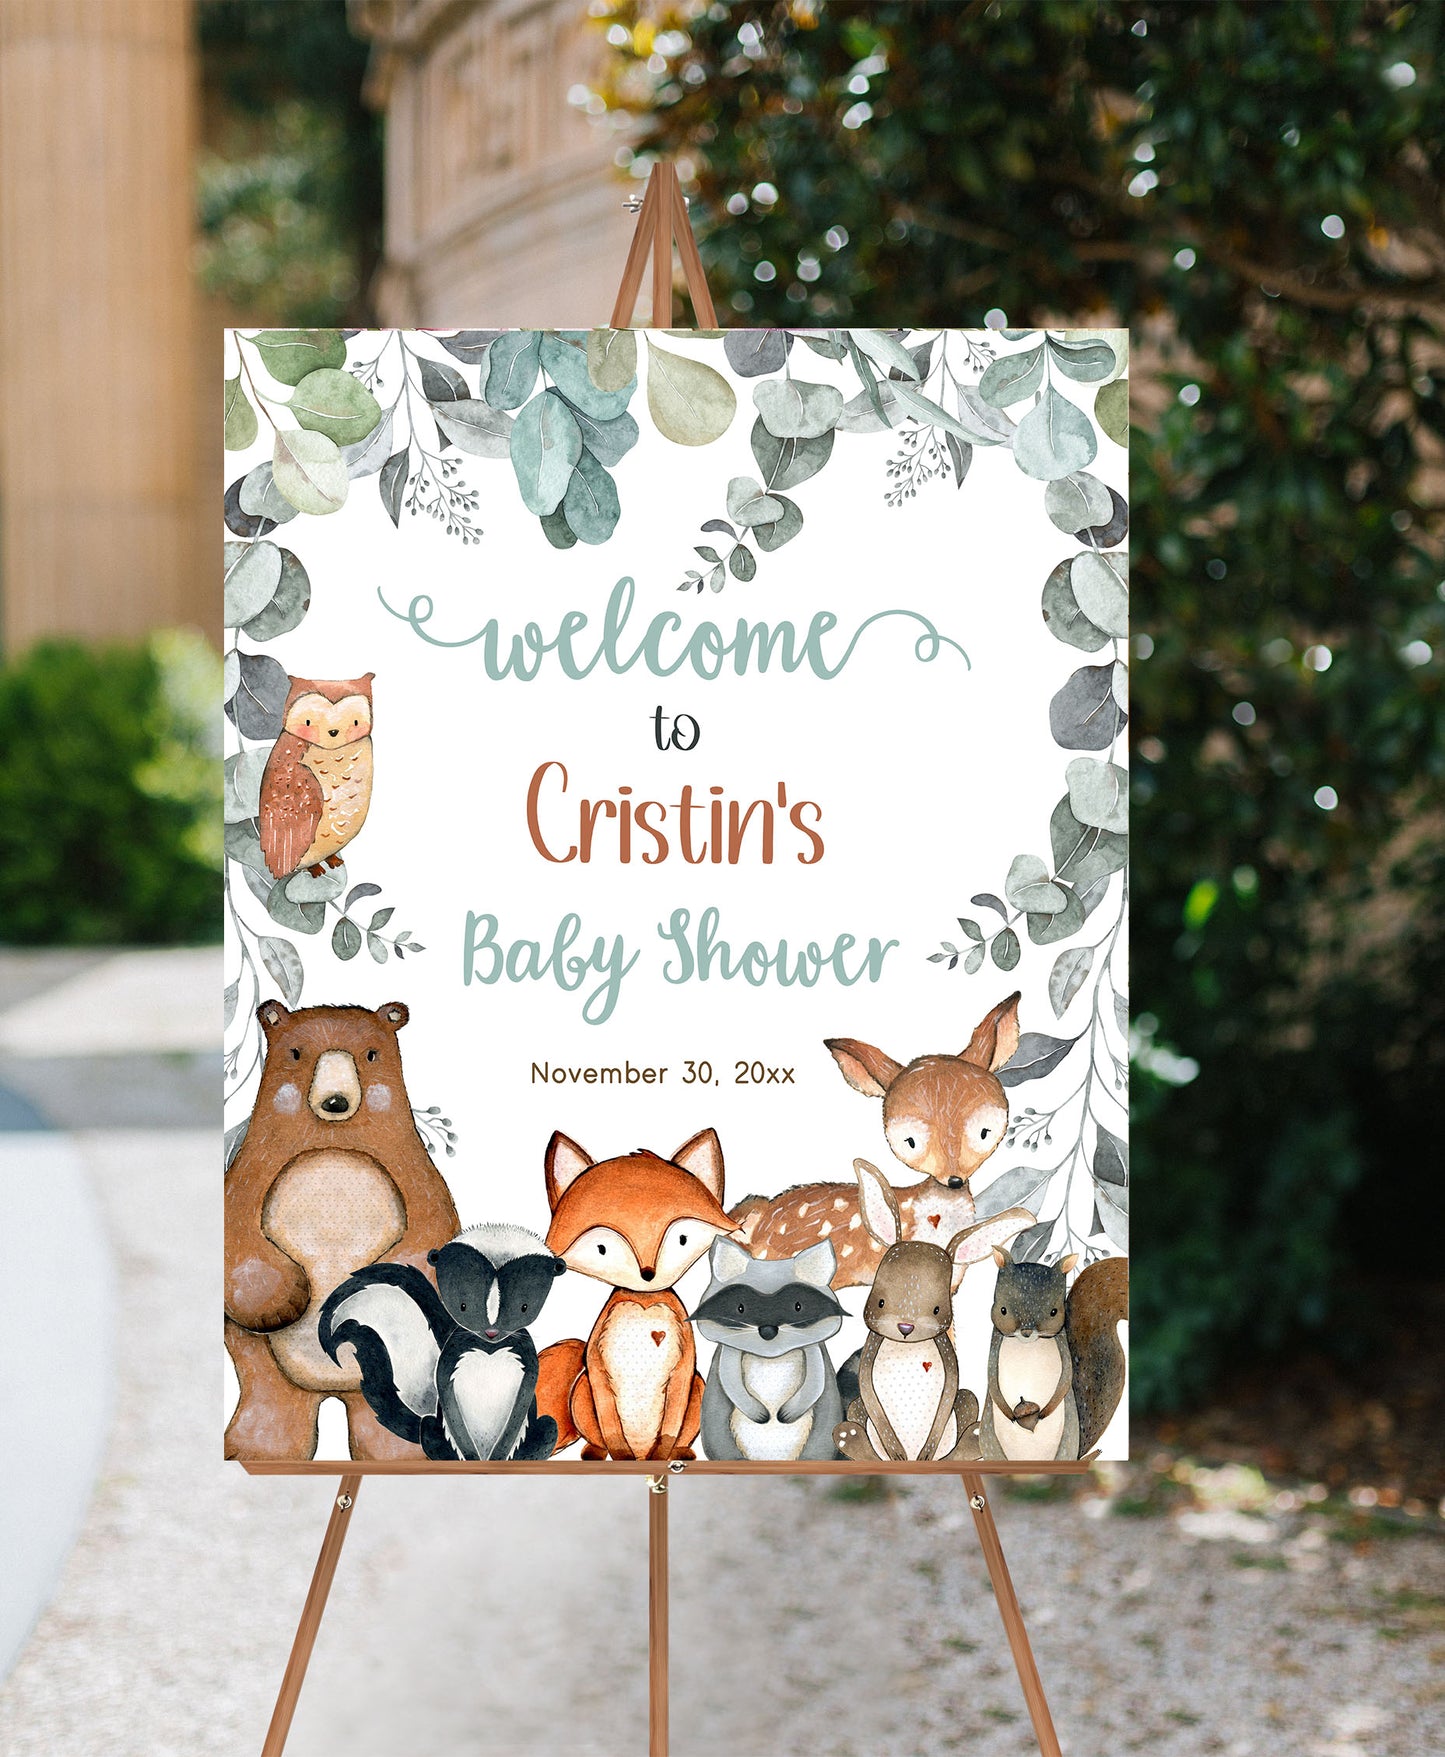 Editable Woodland Greenery Welcome Sign | Woodland Baby shower decorations - 47J1